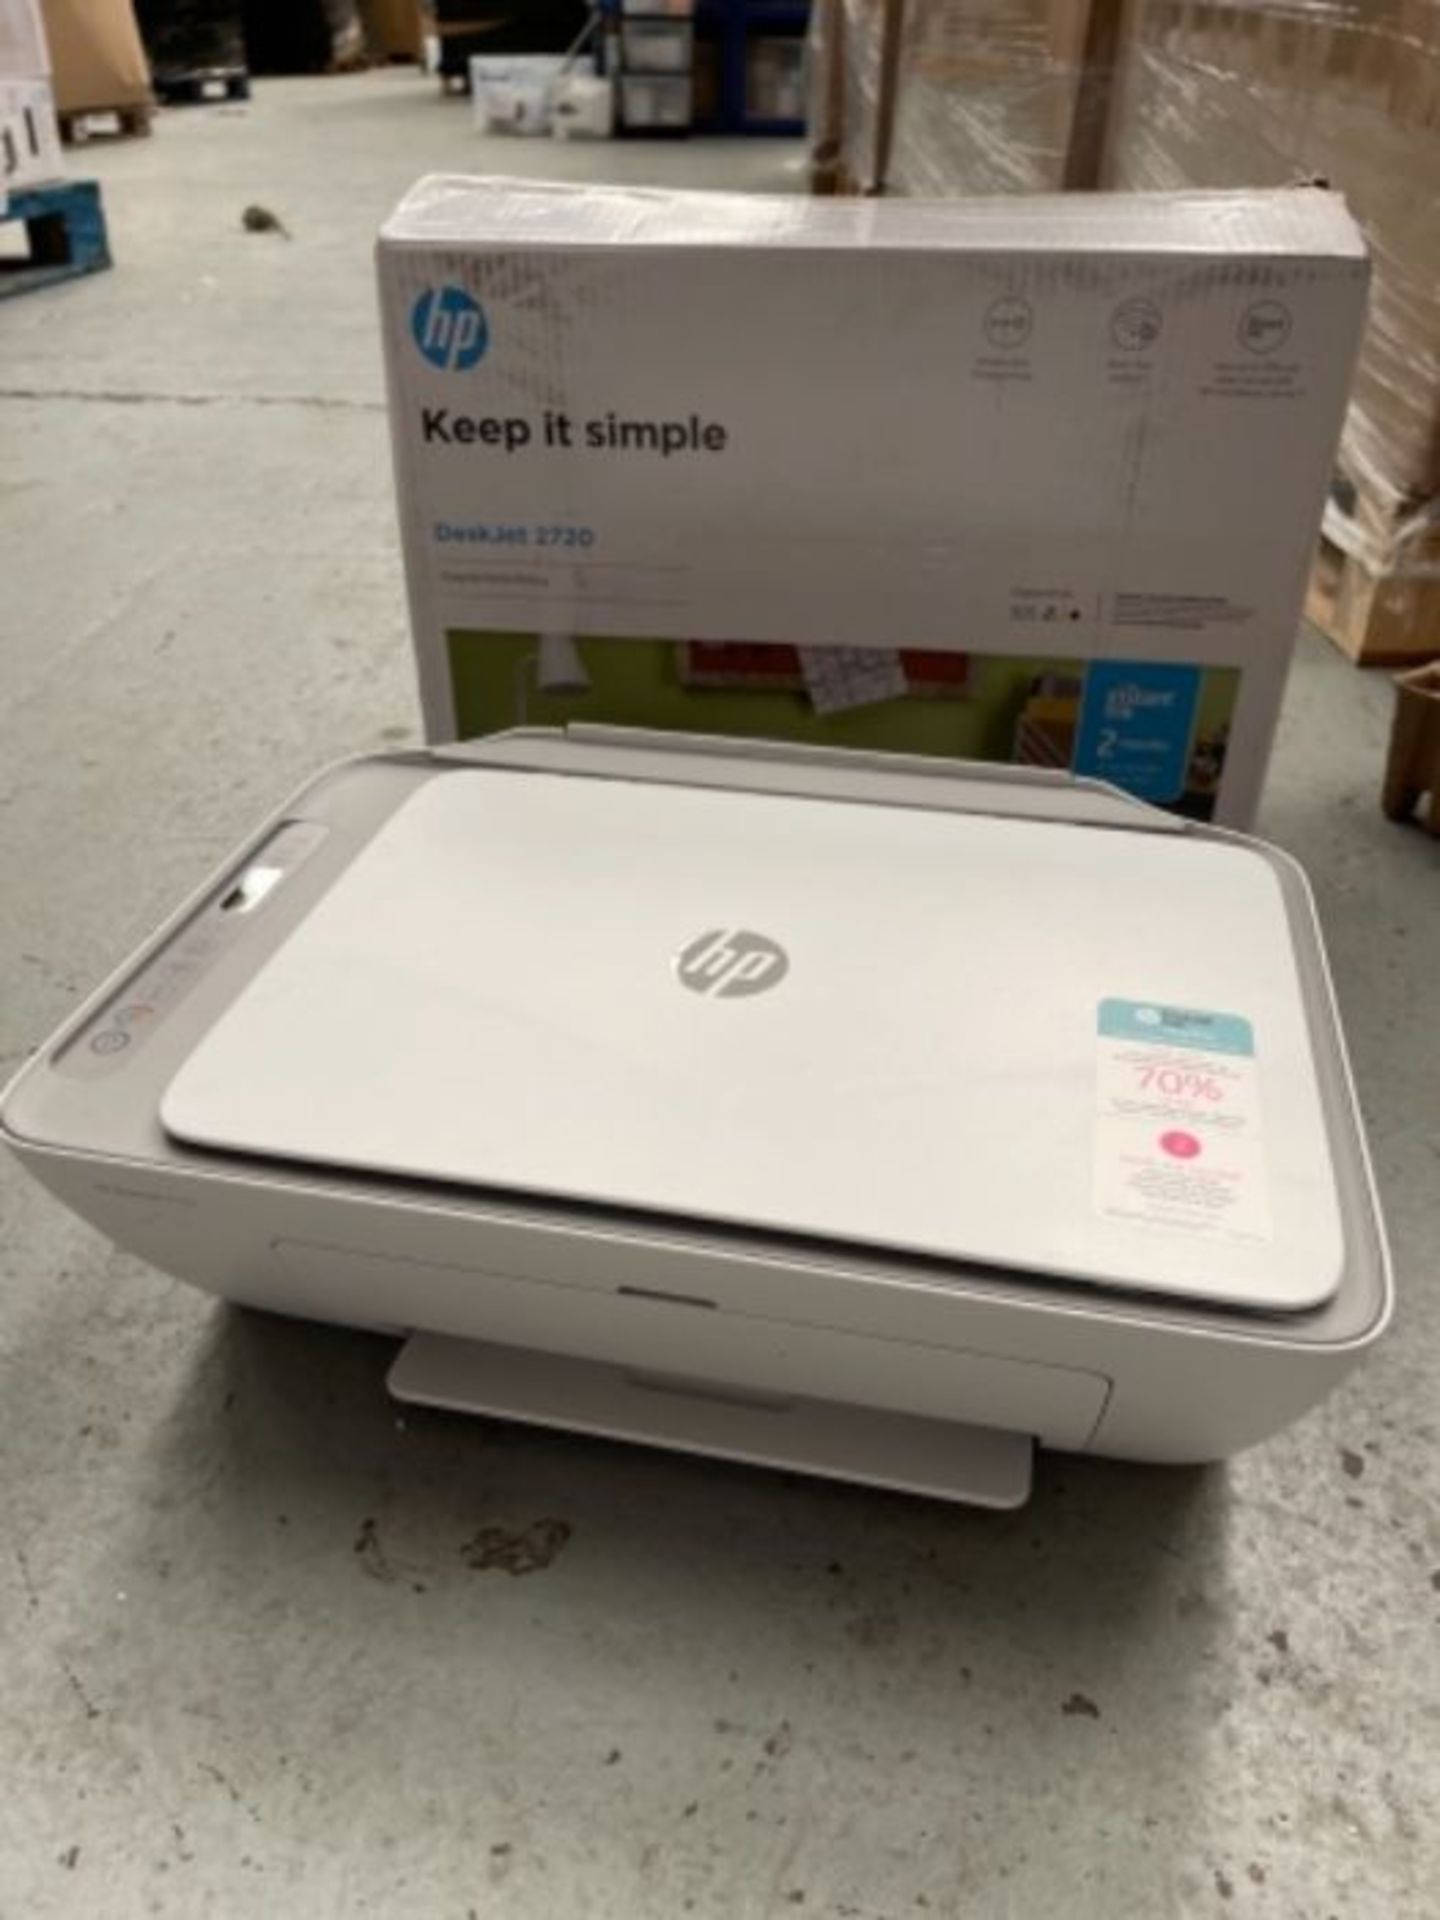 HP DeskJet 2720 All-in-One Printer with Wireless Printing, Instant Ink with 2 Months T - Image 2 of 3